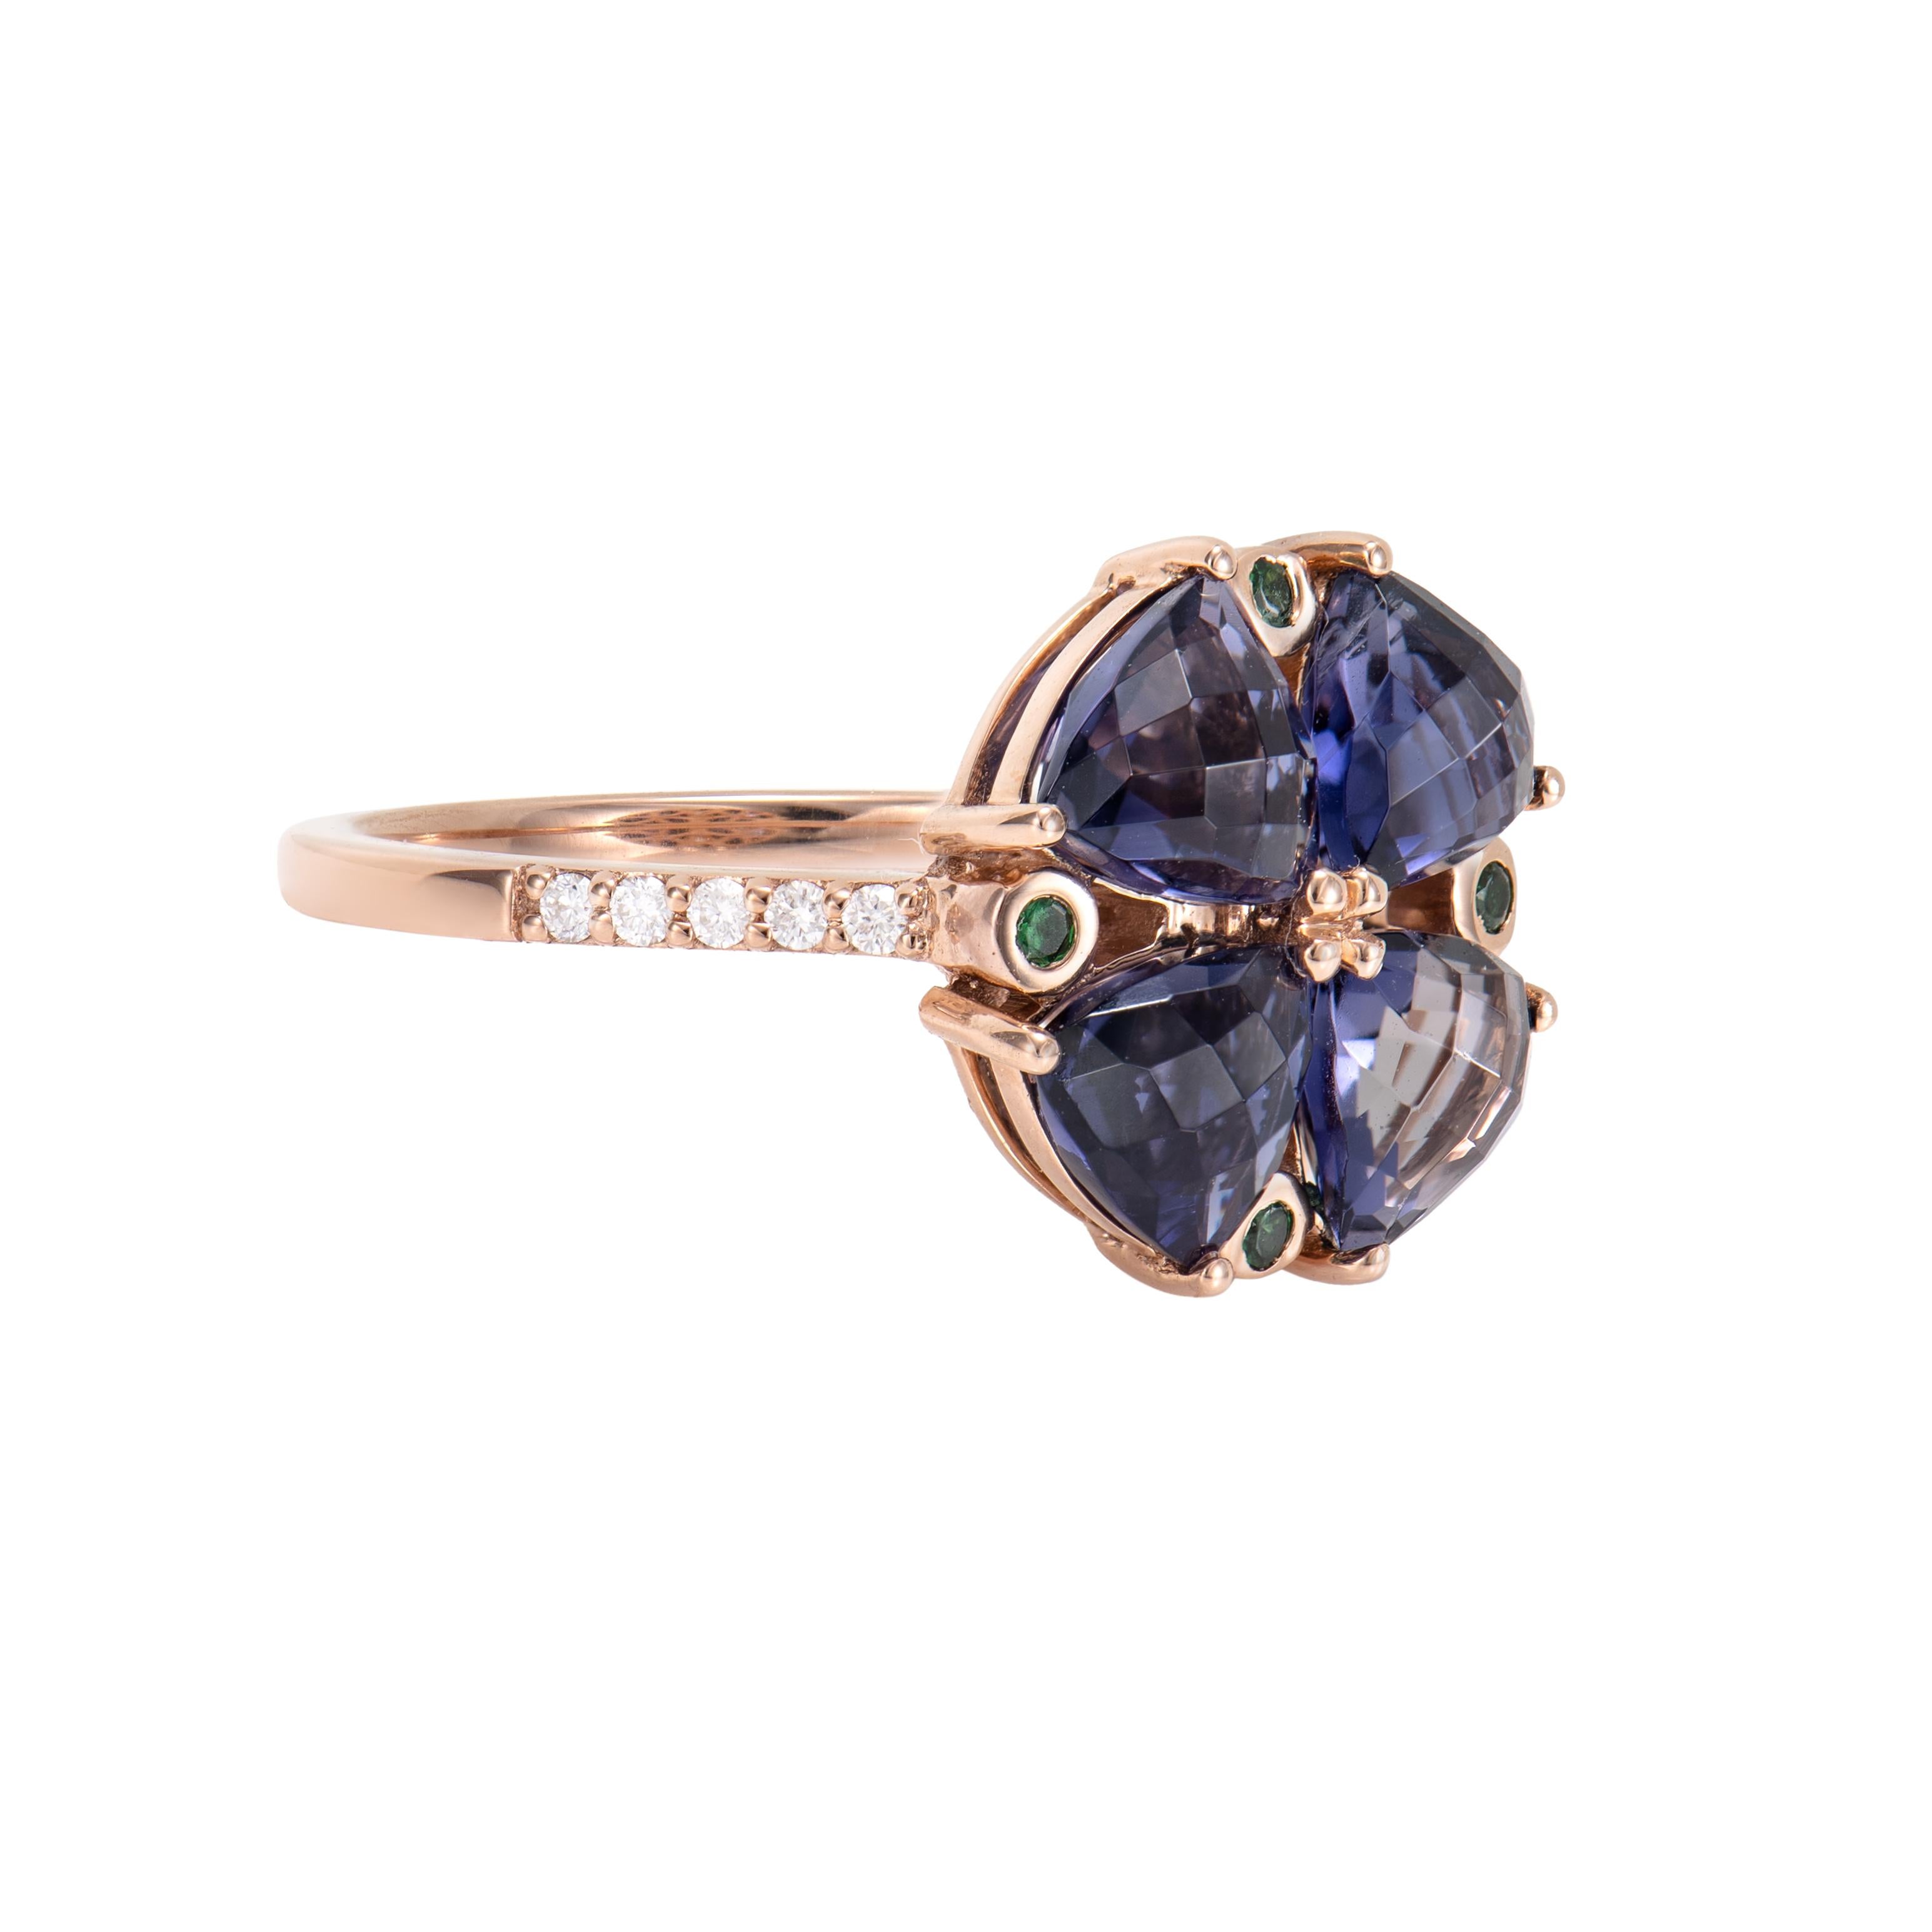 These are fancy iolite Ring in a trillion shape with purple hue. The Ring is elegant and can be worn for many occasions. 

Iolite Fancy Ring in 18Karat Rose Gold with Tsavorite and White Diamond.

Iolite: 2.91 carat, 5.50mm size, Trillion Briolette